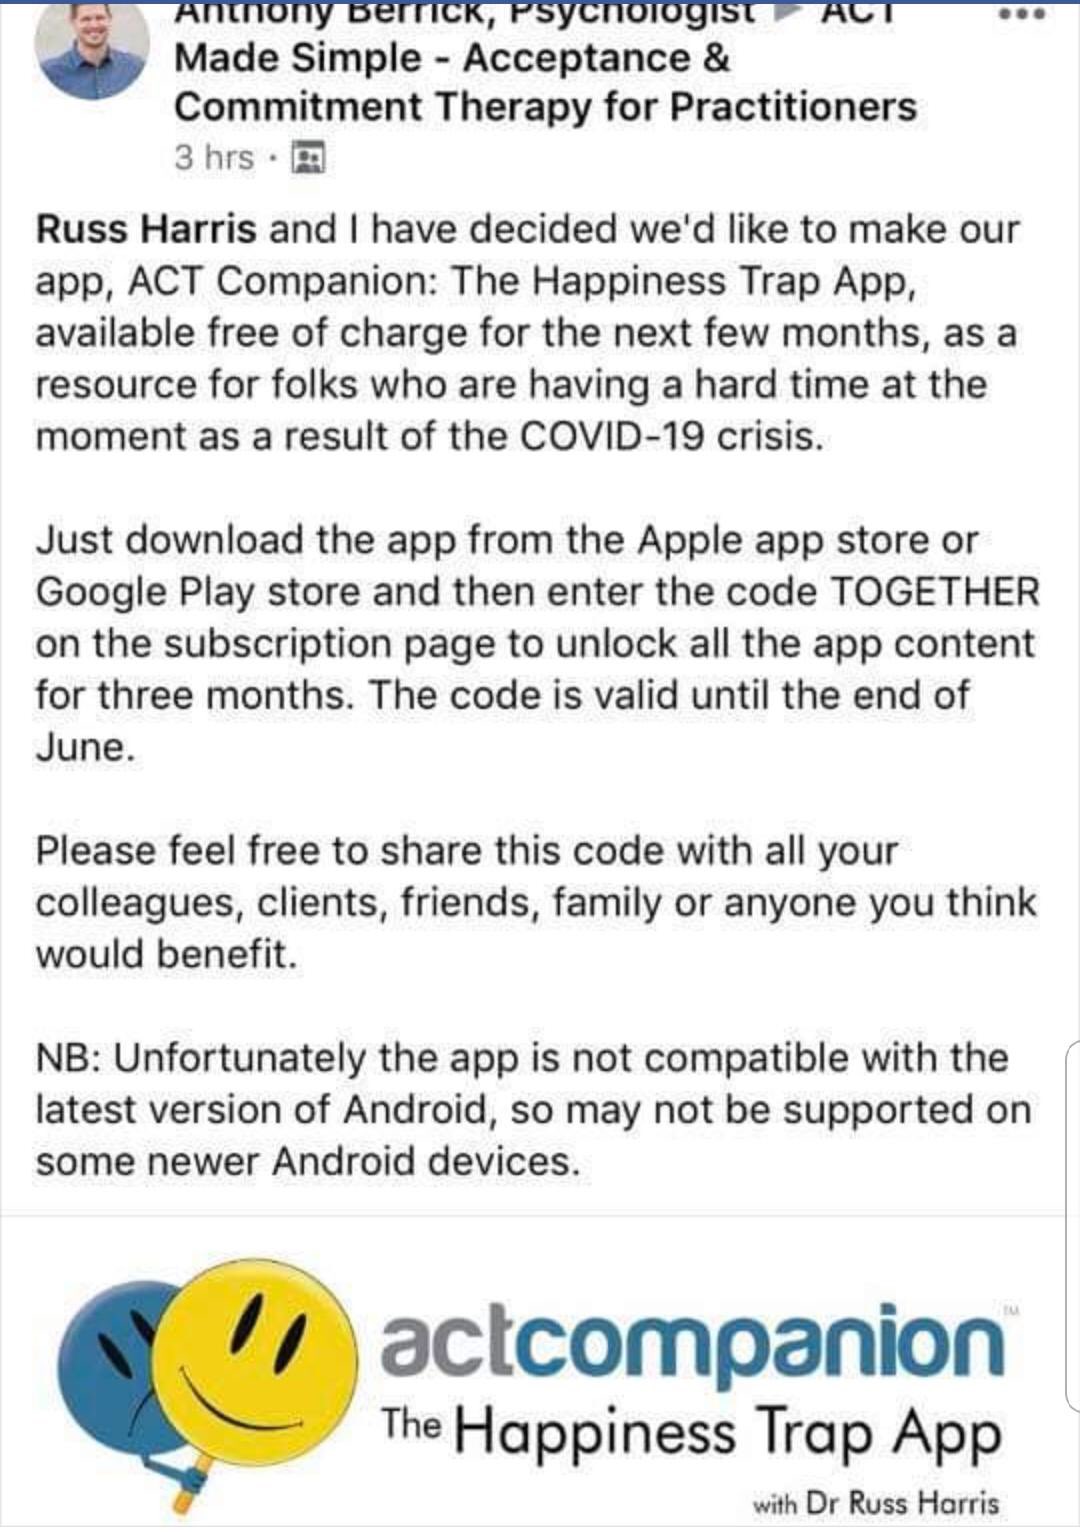 S Pellegrini On Twitter The Acceptance And Commitment Therapy App Has Kindly Been Made Free By Its Creators As An Extra Support In Light Of Covid 19 The Code To Access All Features